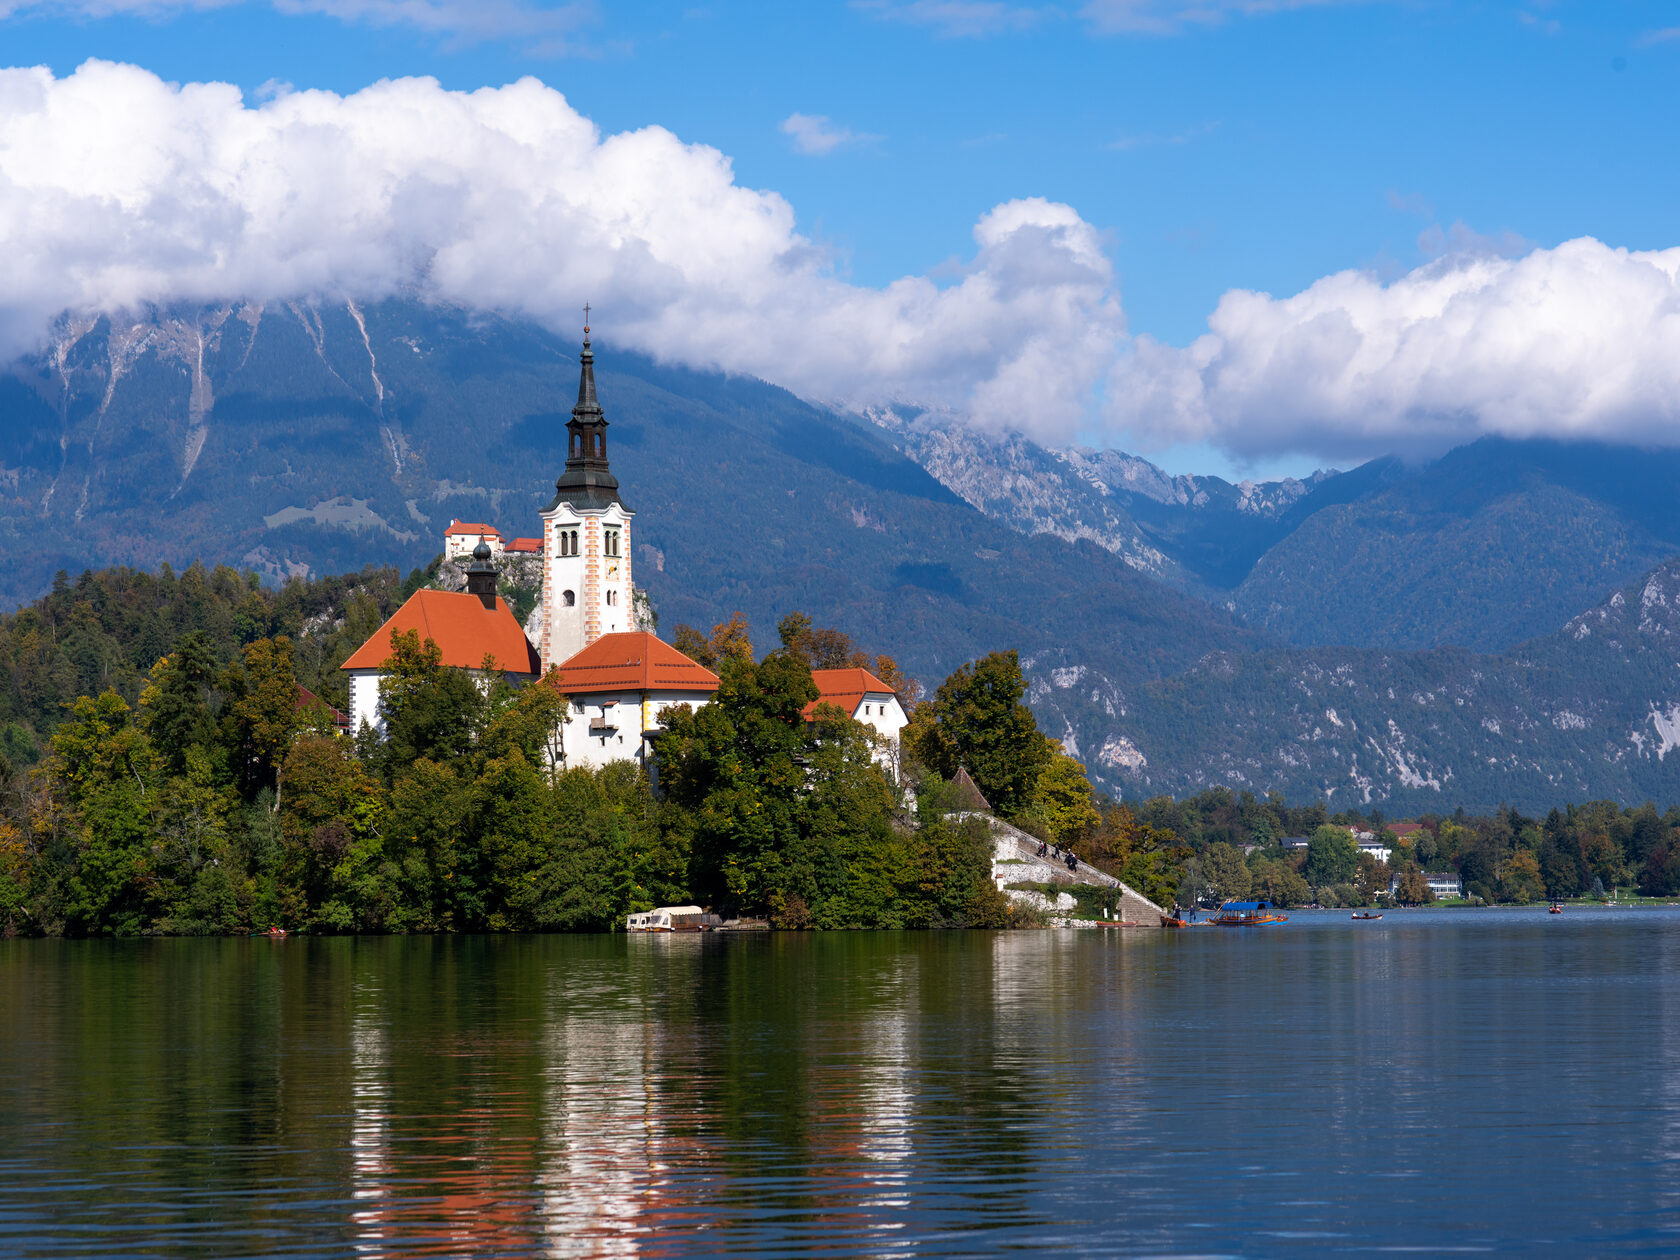 Rent a Tesla for a day to see the lake Bled